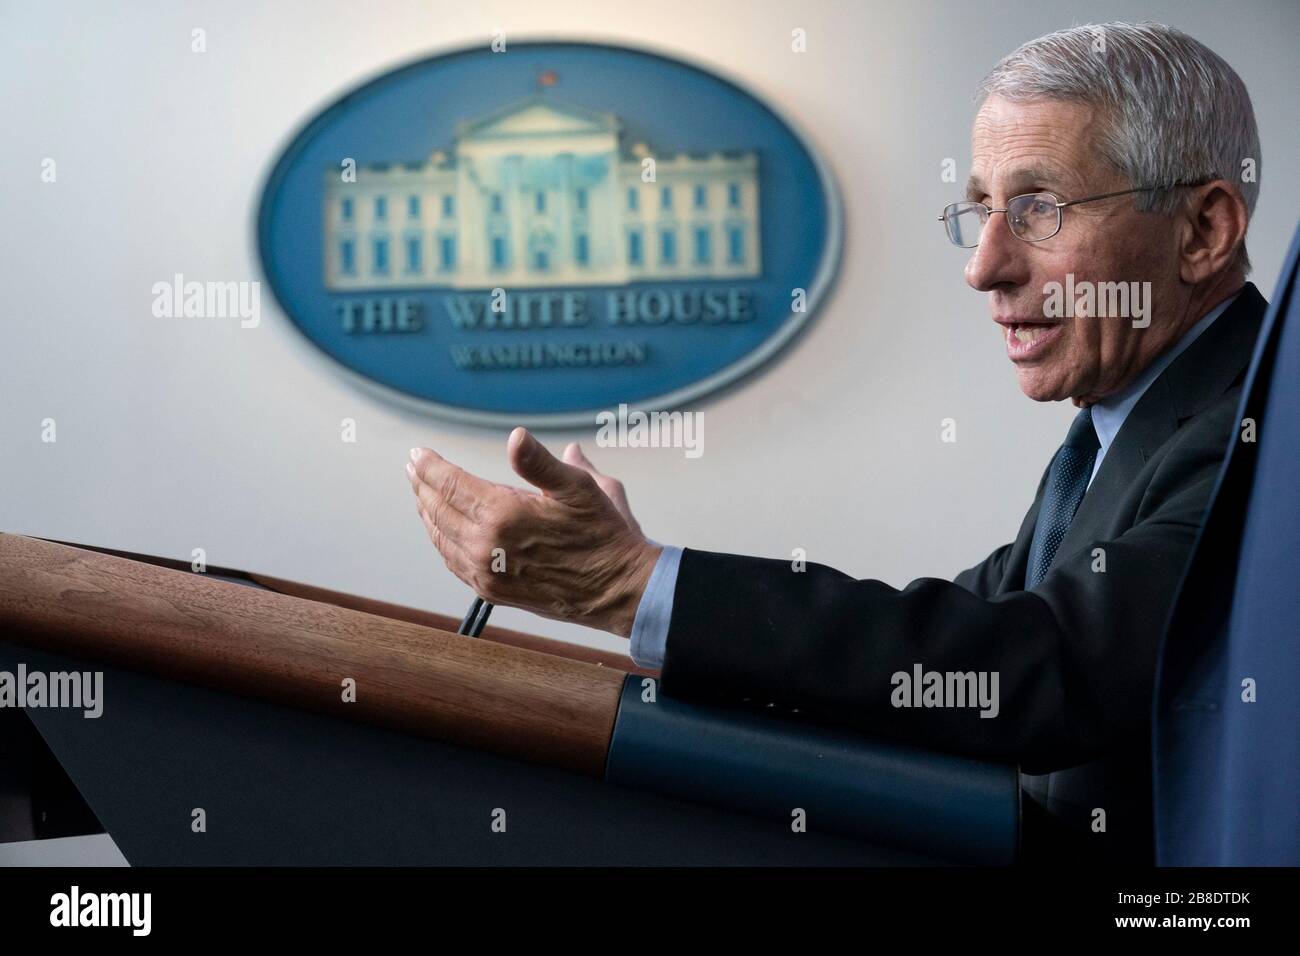 Dr. Anthony Fauci, Director of the National Institute of Allergy and Infectious Diseases, delivers remarks at the White House Coronavirus Task Force briefing in the Press Briefing Room of the White House March 16, 2020 in Washington, DC. Stock Photo